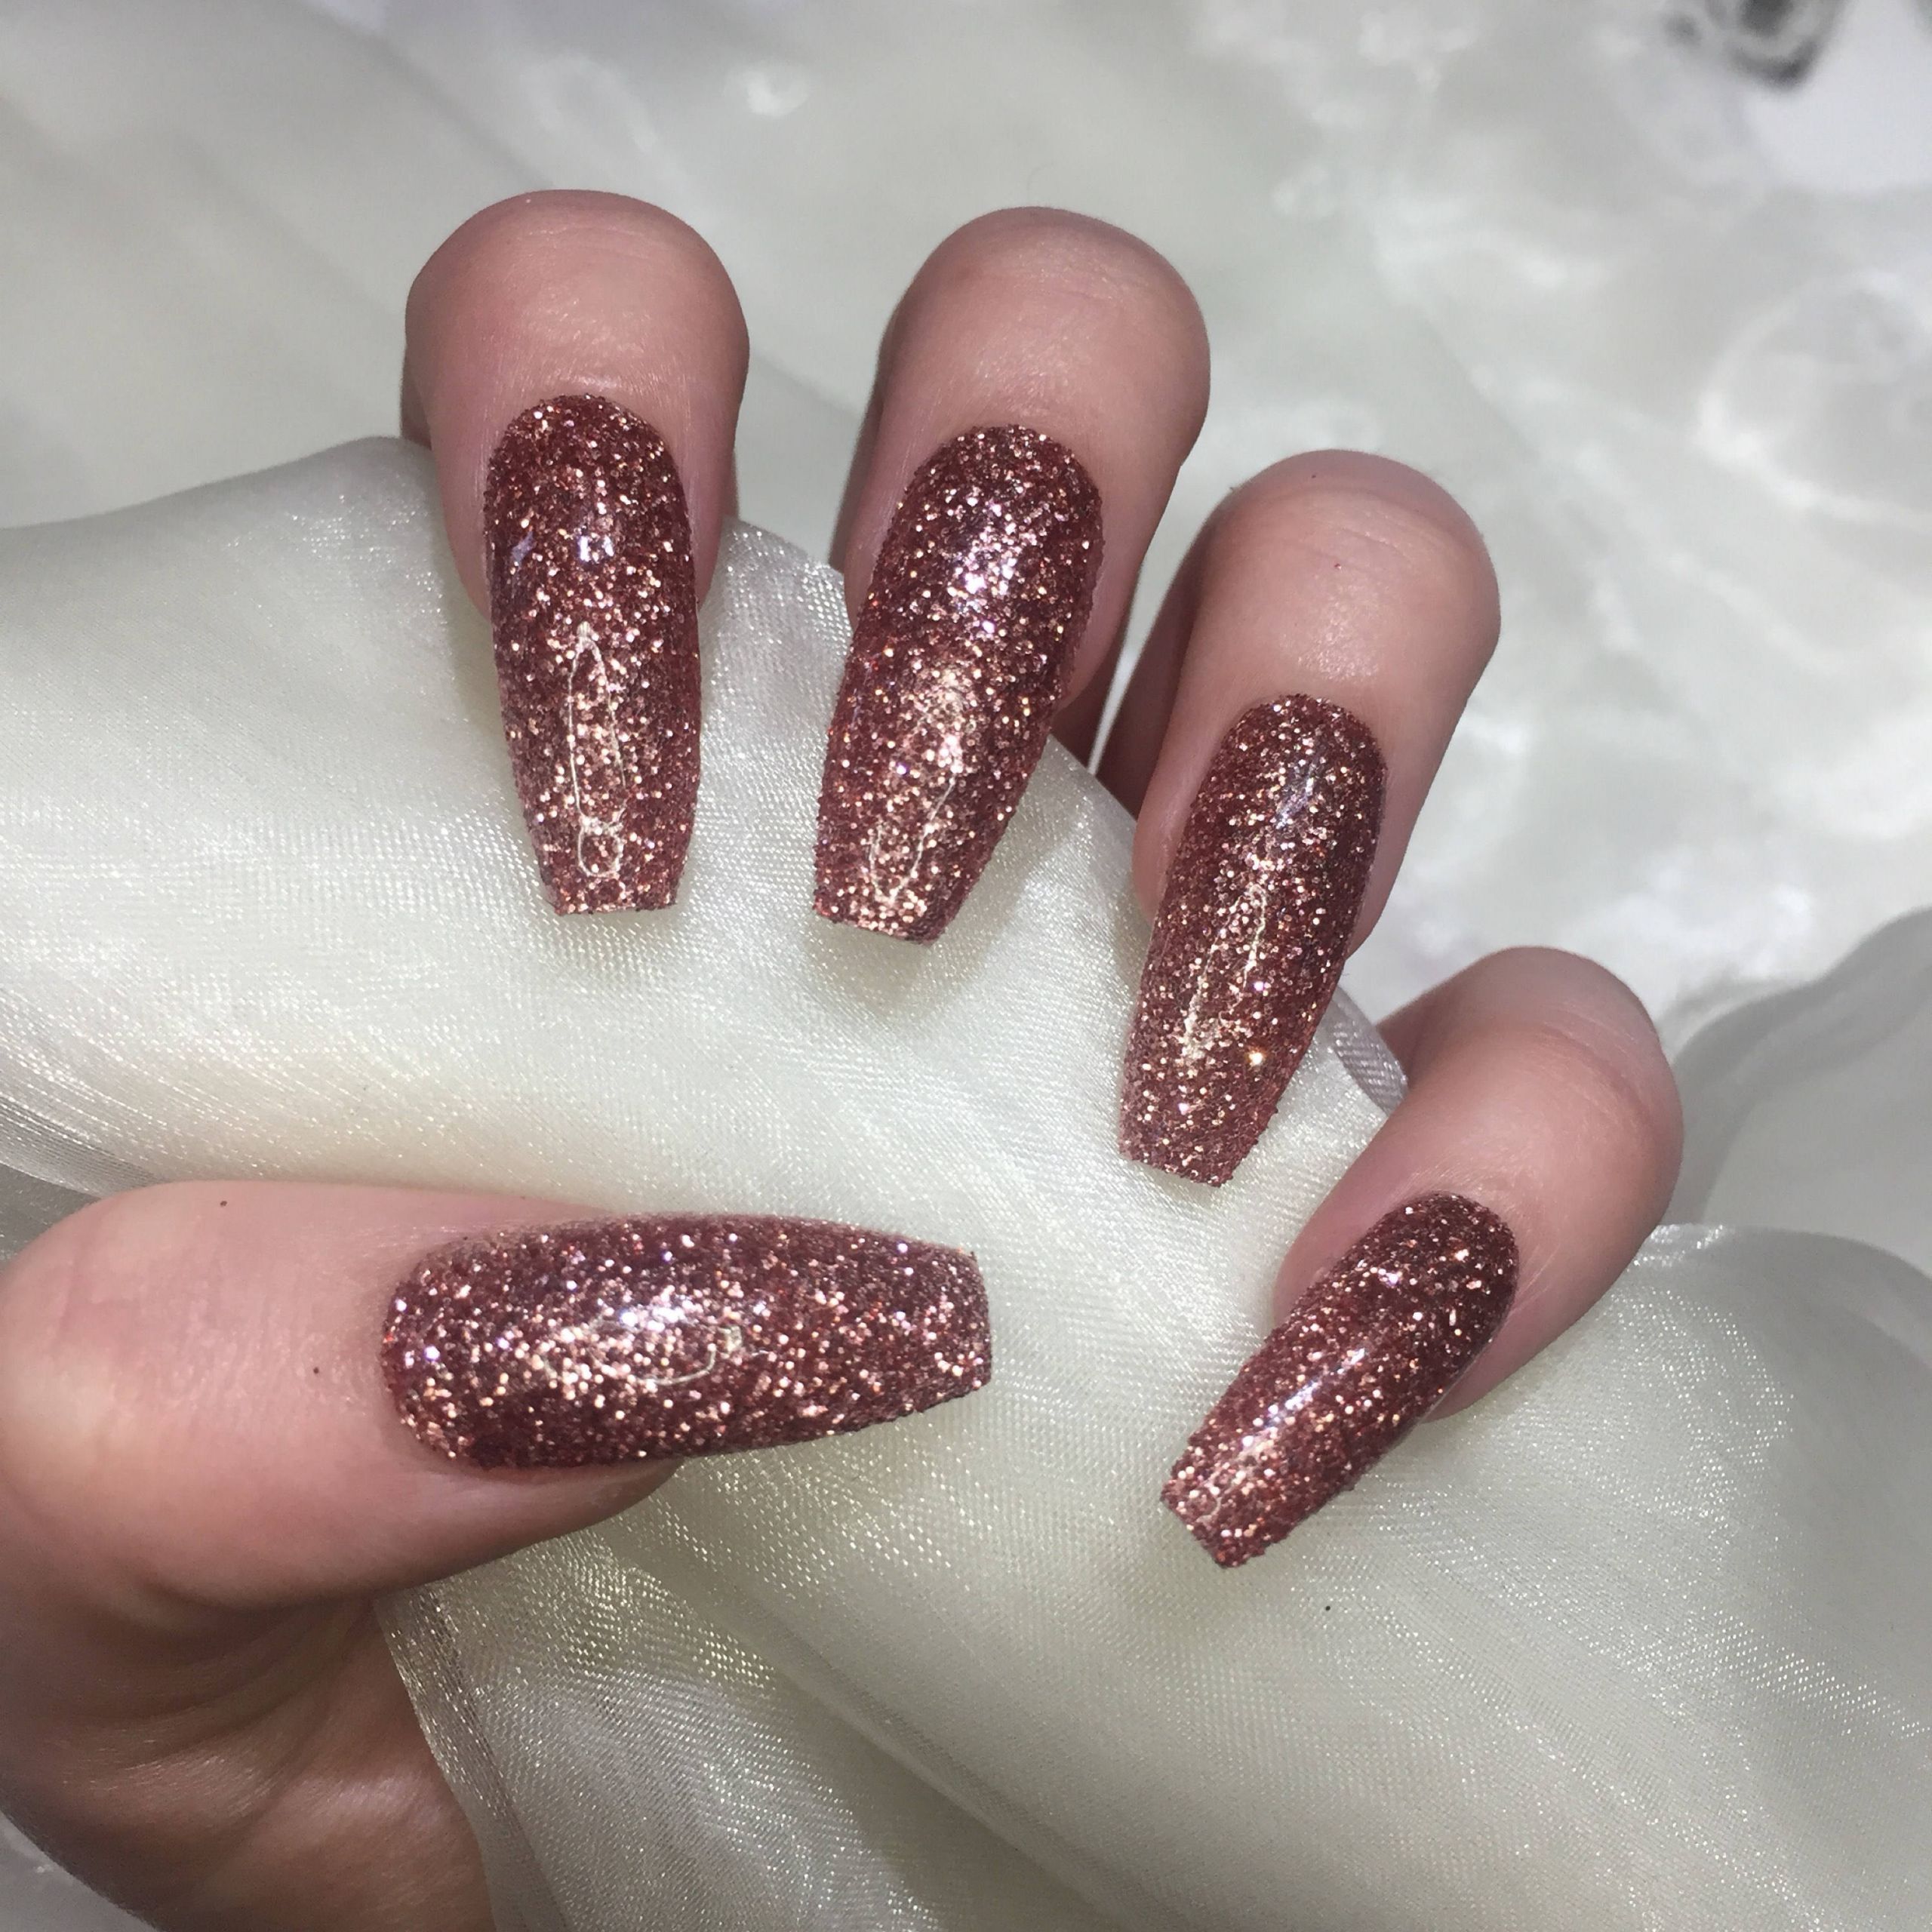 Rose Gold Glitter Nails
 Extra Long Coffin Rose Gold Glitter Coffin False Nails